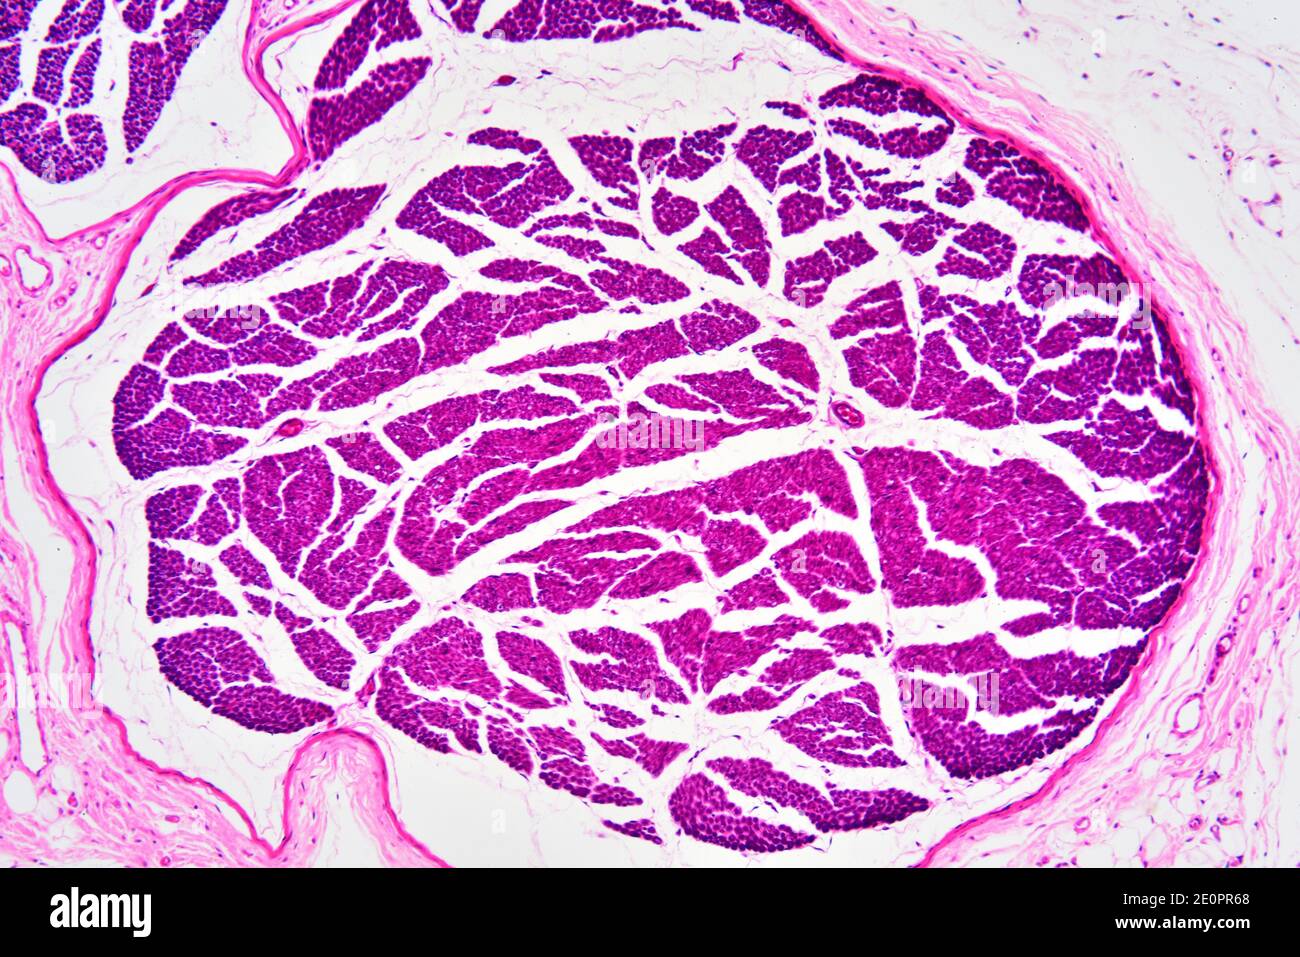 Human nerve fibers with perineurium. X75 at 10 cm wide. Stock Photo